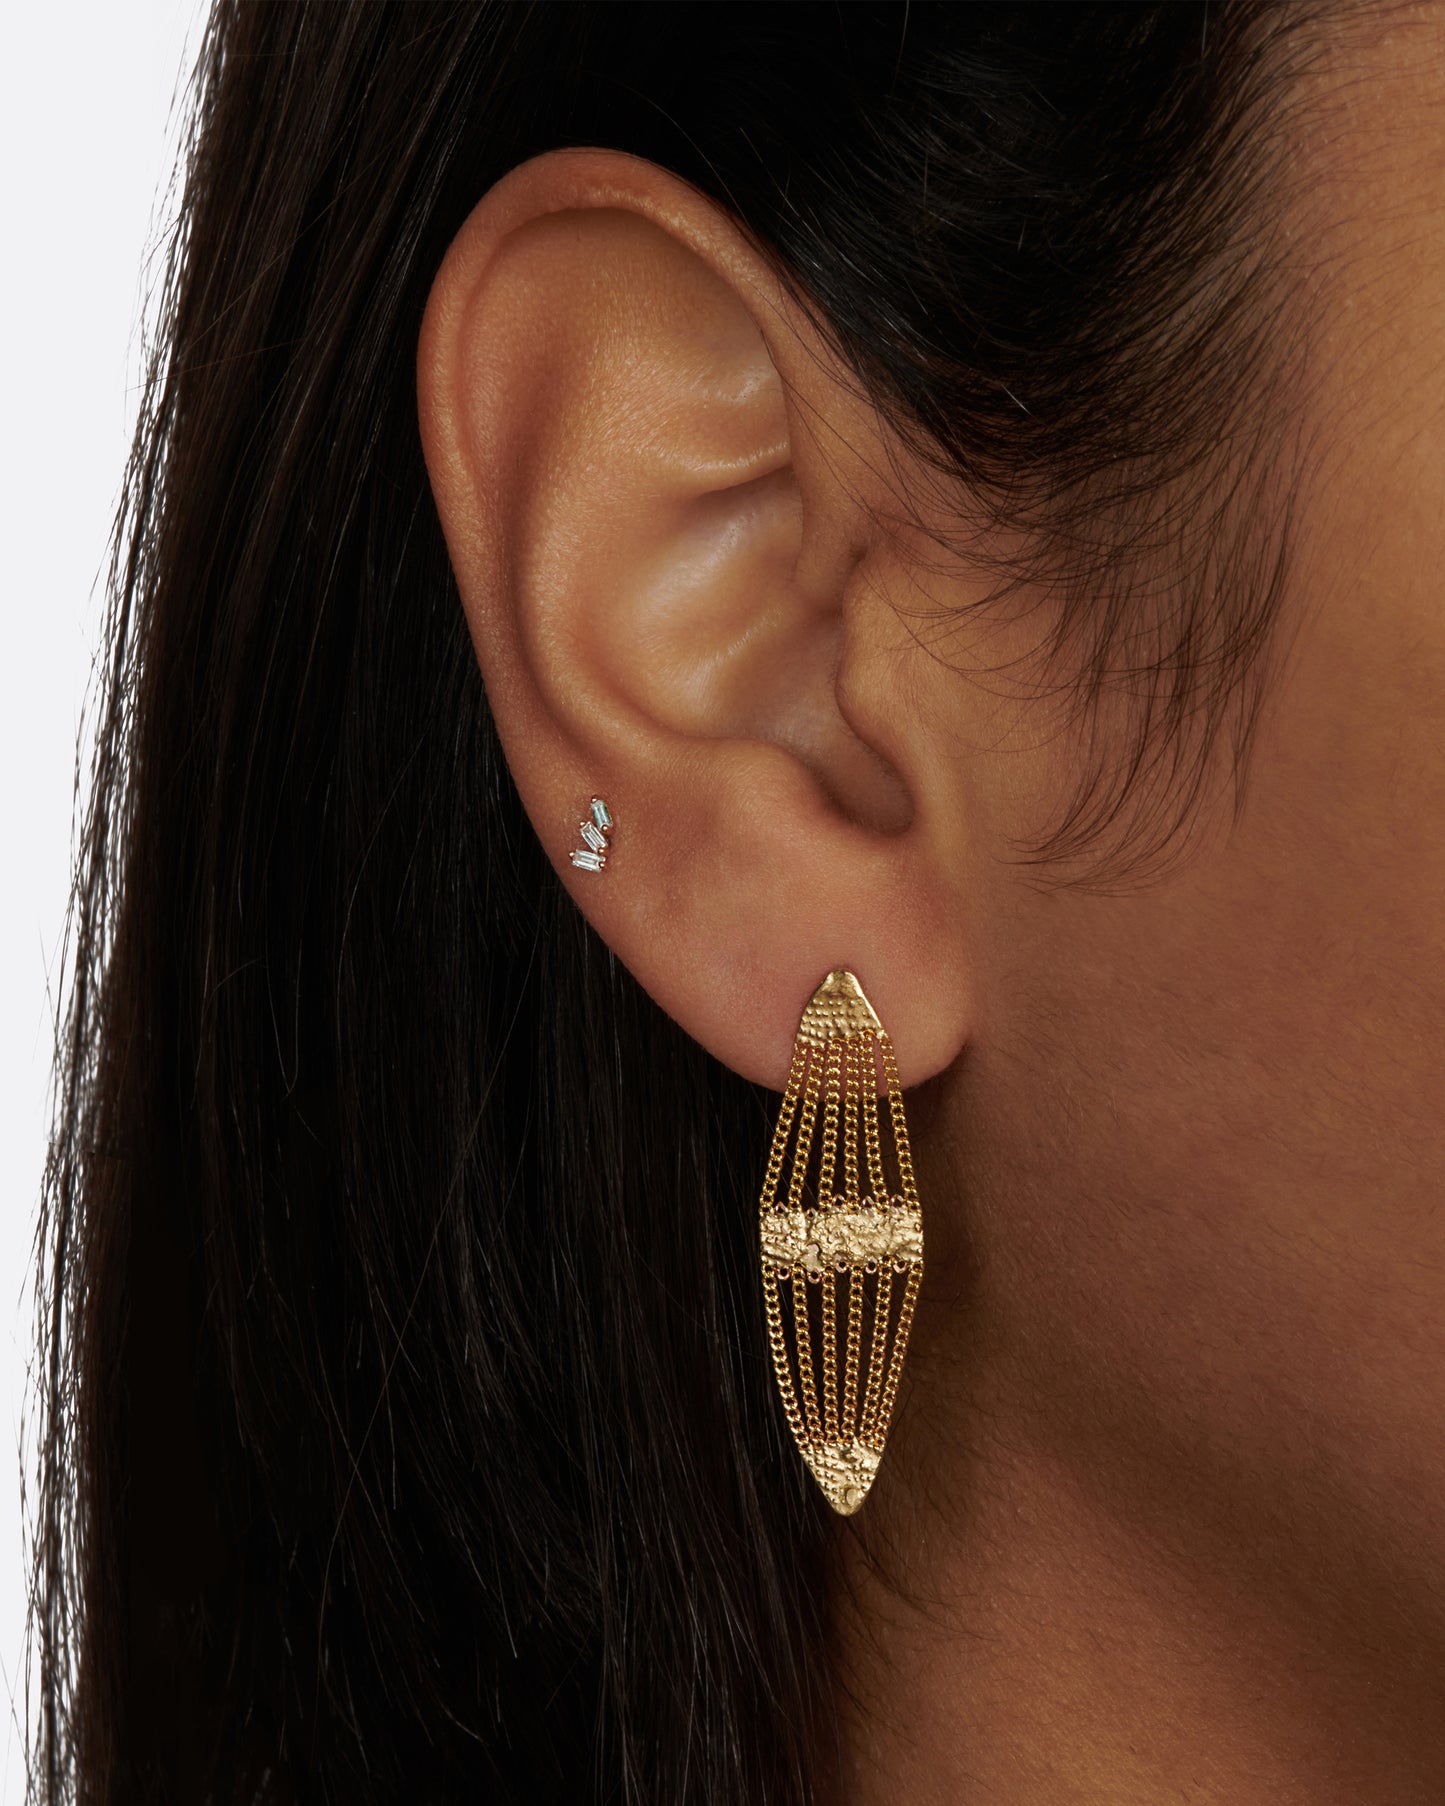 A pair of canoe-shaped earrings made of gold chain and solder.